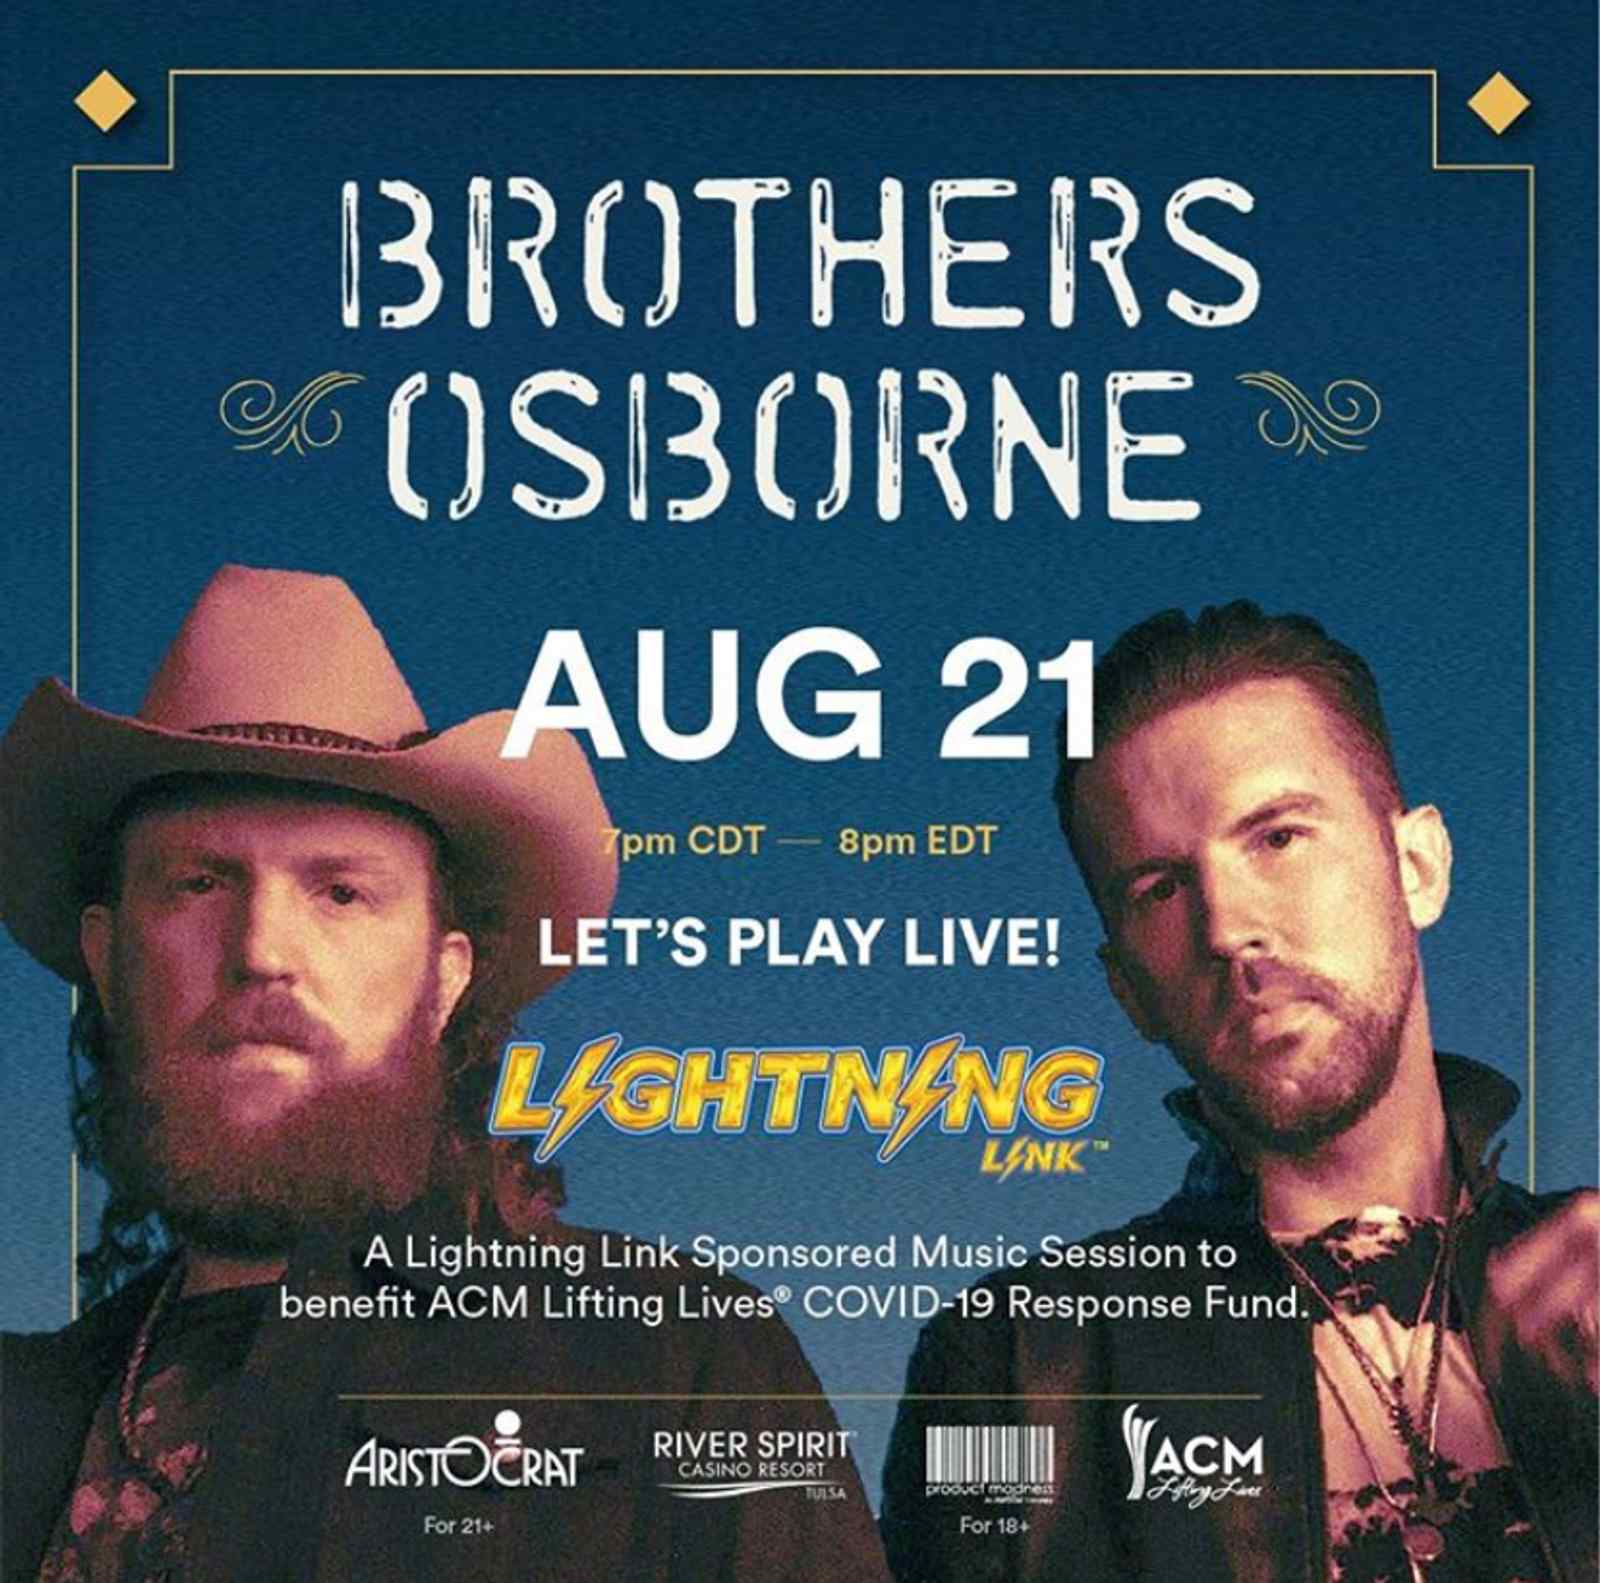 Brothers Osborne: "Let's Play Live," presented by Lighting Link™